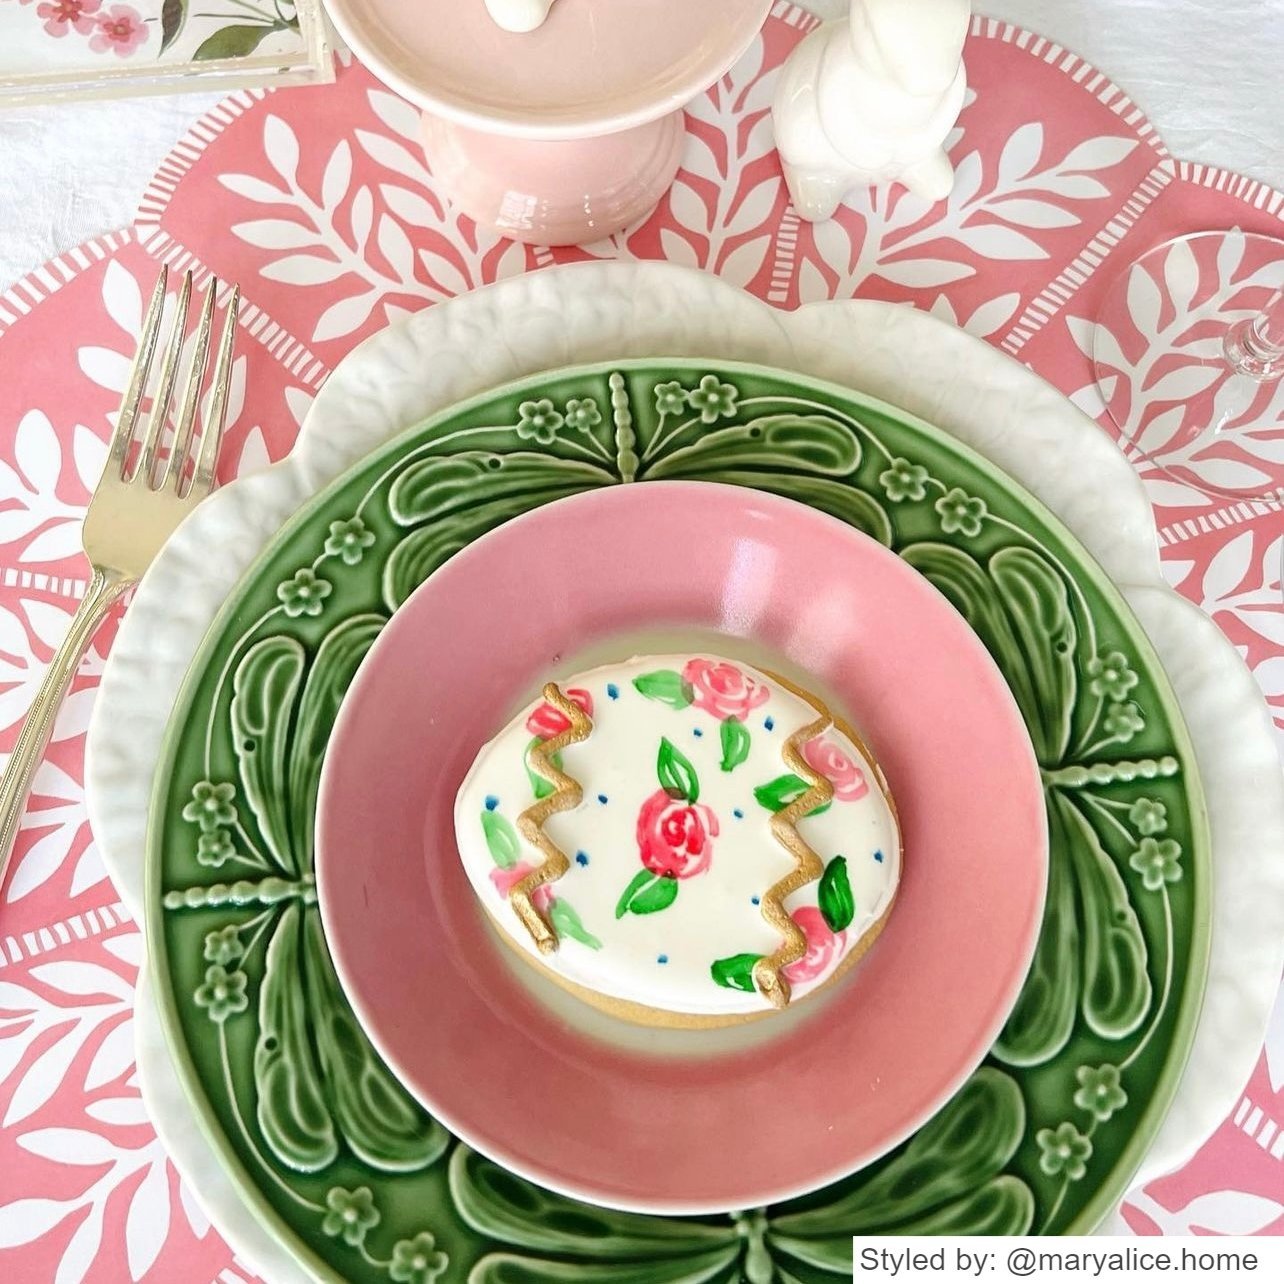 Pink and white scalloped round paper placemat layered with green, white and pink plates